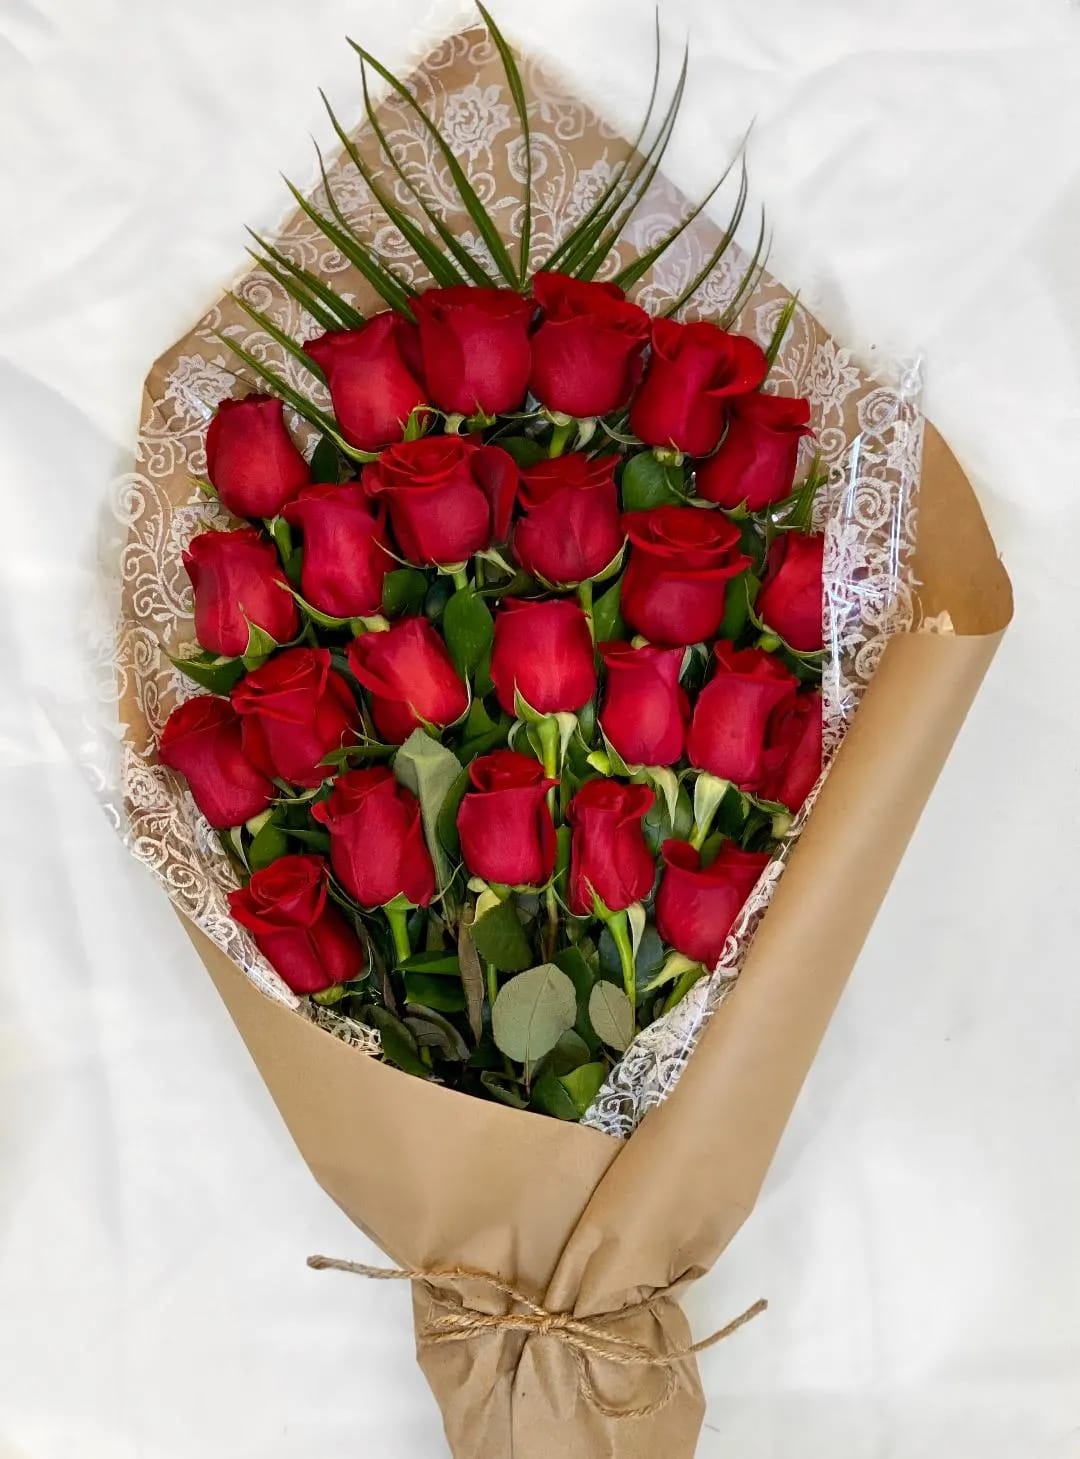 24 Wrapped Red Rose Bouquet in Grand Prairie, TX | Vivid Flowers